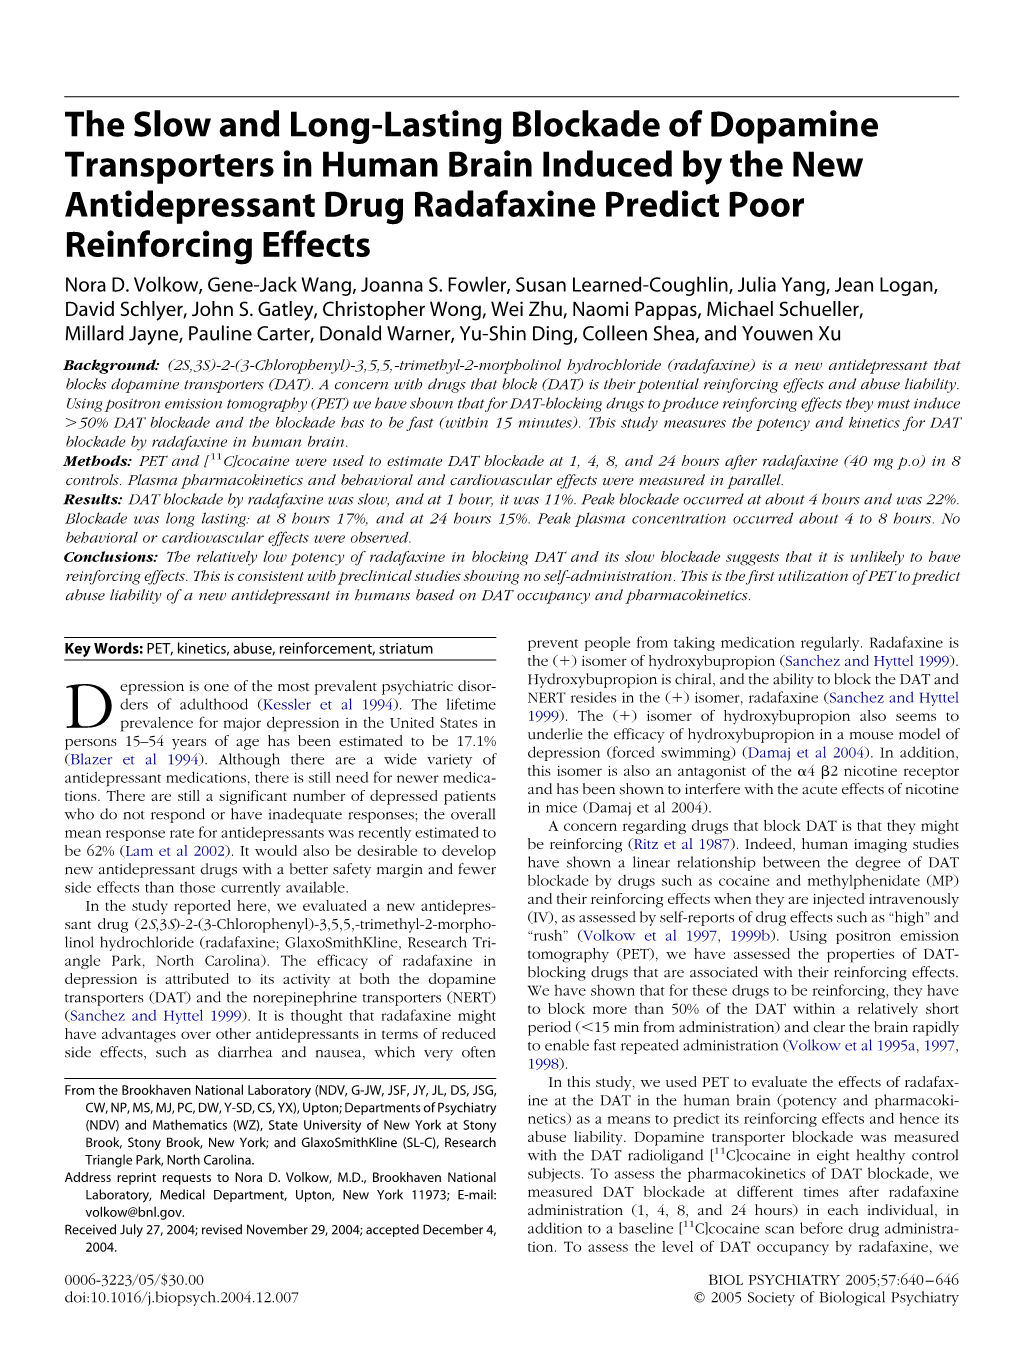 The Slow and Long-Lasting Blockade of Dopamine Transporters in Human Brain Induced by the New Antidepressant Drug Radafaxine Predict Poor Reinforcing Effects Nora D